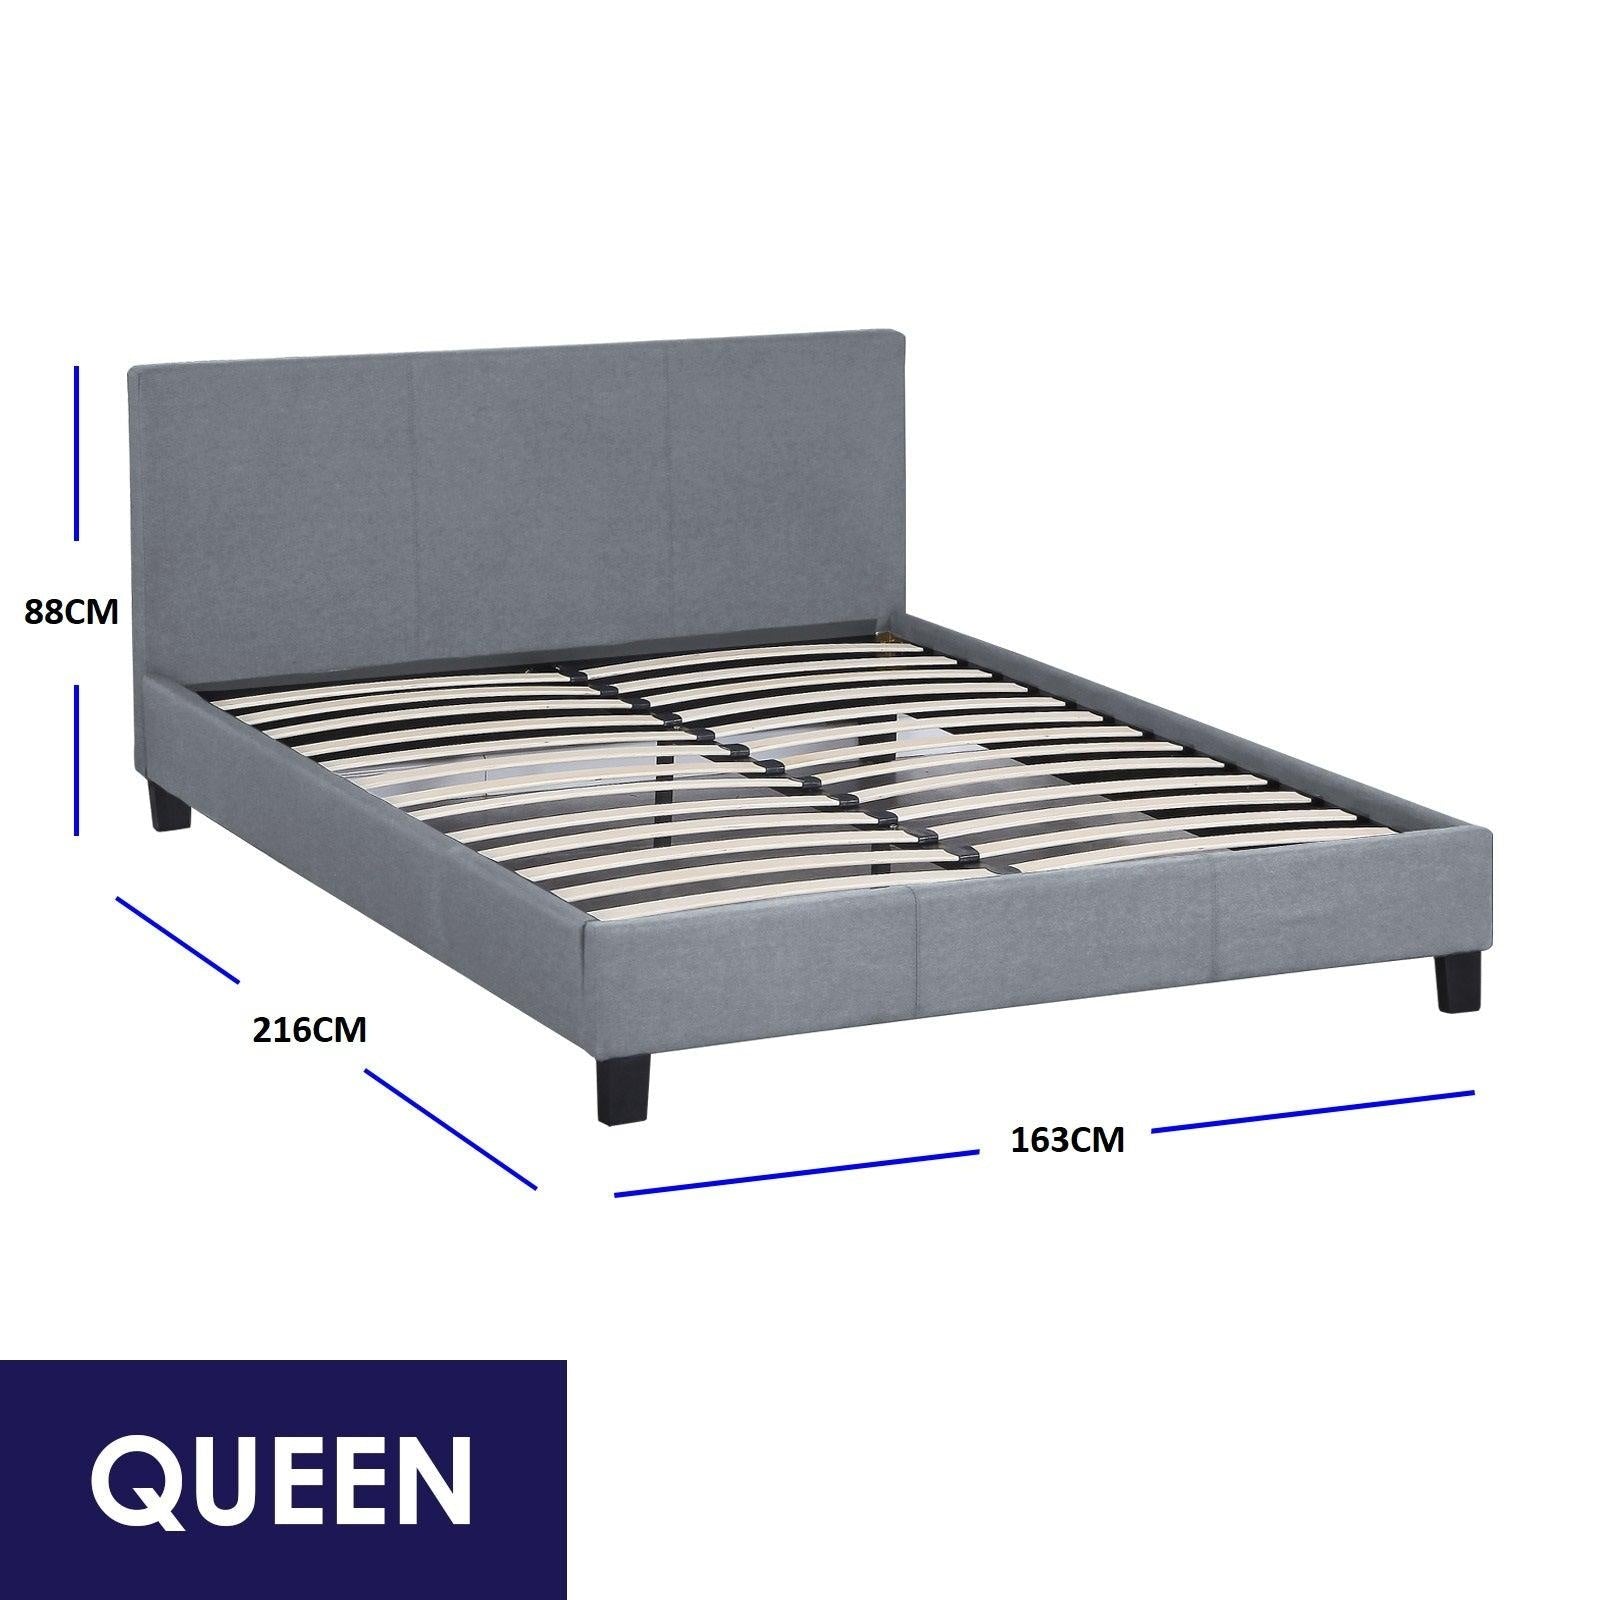 Milano Sienna Luxury Bed Frame Base And Headboard Solid Wood Padded Linen Fabric Grey Queen Deals499